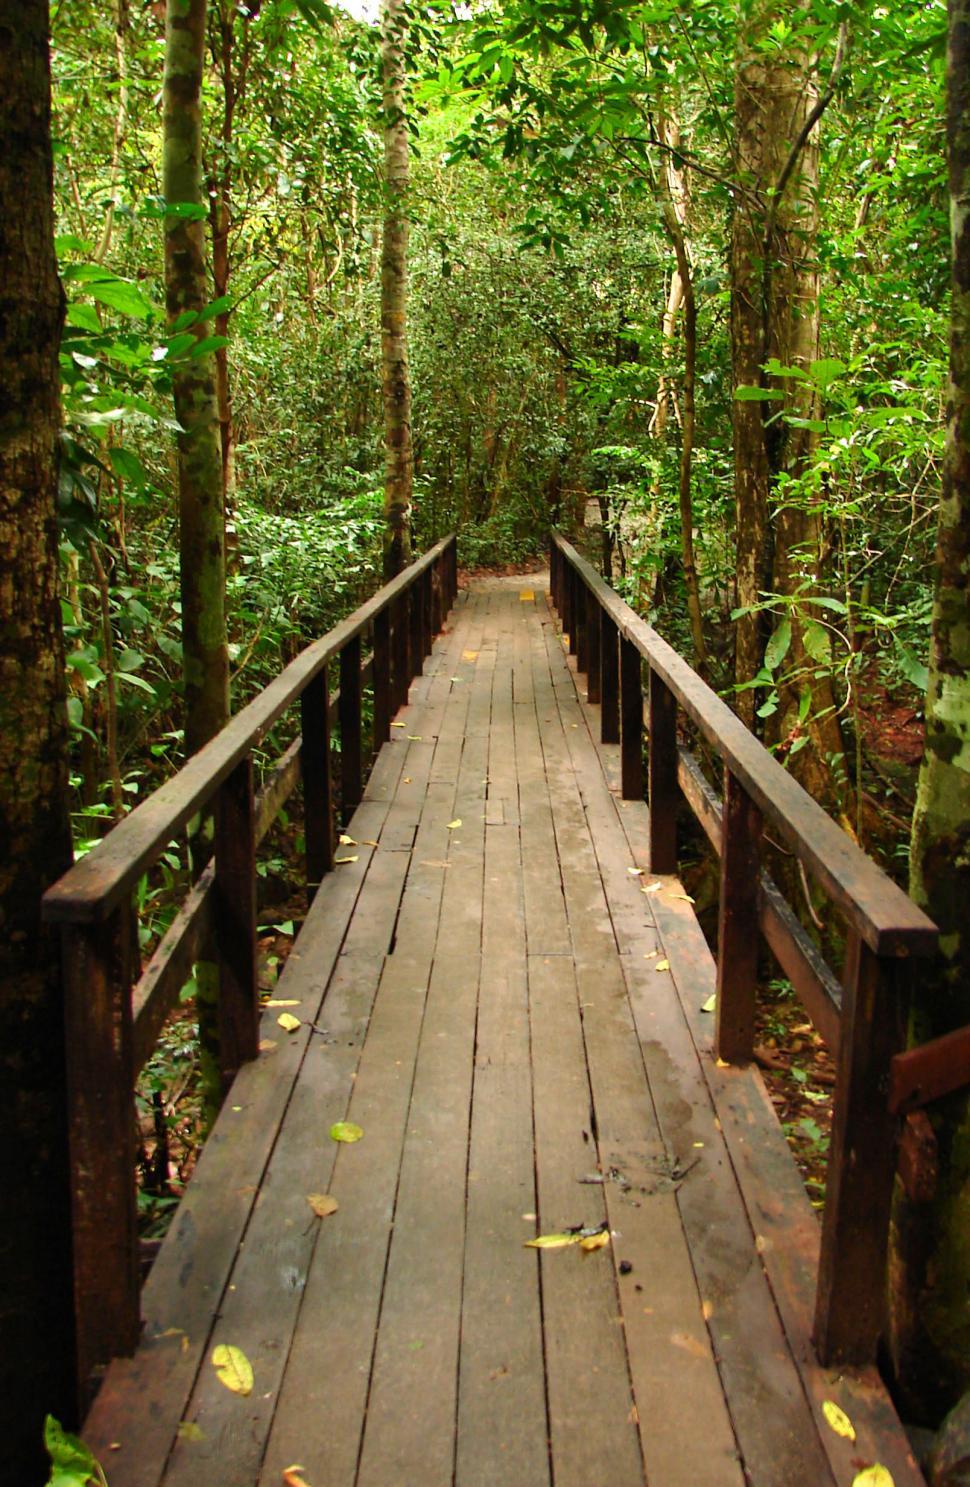 Free Image of Small Bridge in Forest 